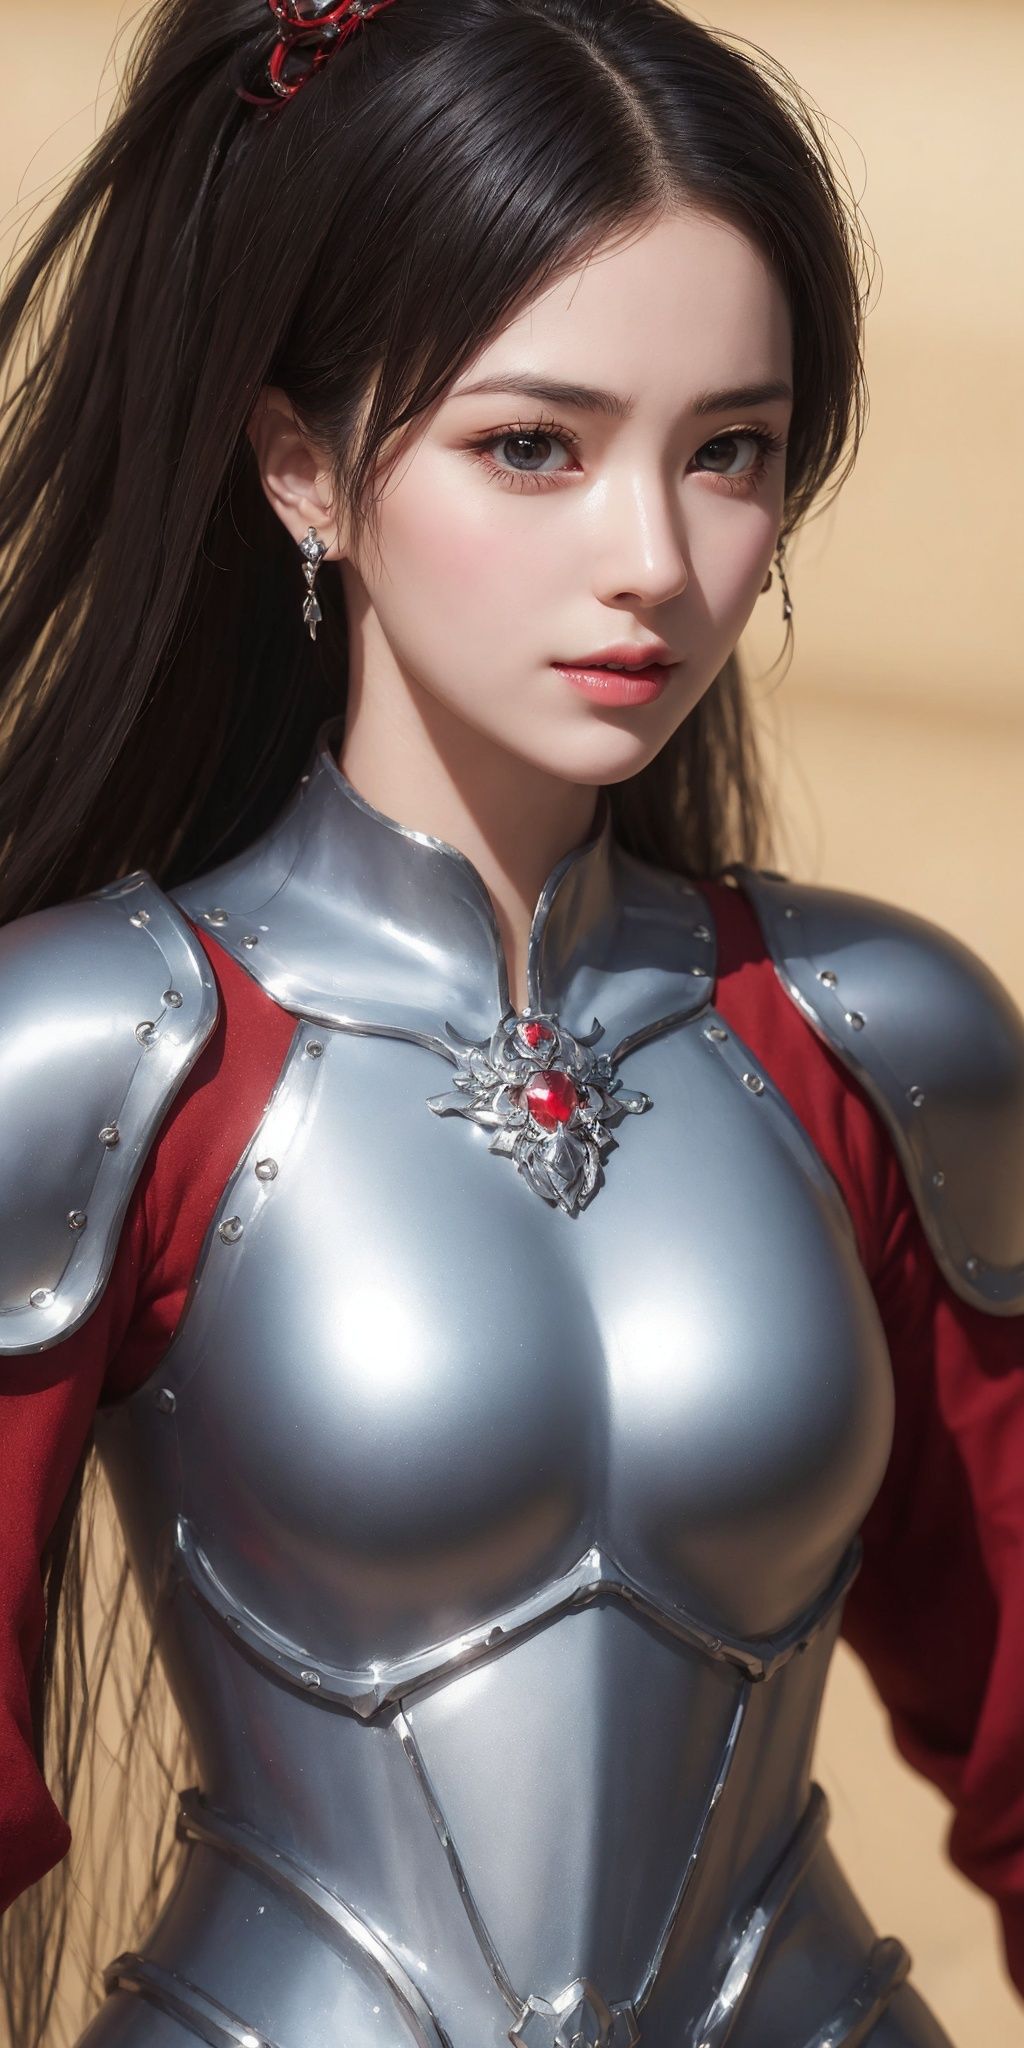 (Face close-up), (Half body photo), a girl with crystal clear skin, black high ponytail, silver armor, metal, belt, armor, armor, red cloak, wielding weapons, correct body, exquisite facial features painting, dusk, desert background, desert, wilderness, weeds, battlefield, sandstorm, desolation, strong and resolute expression, eyes, light, glimmer